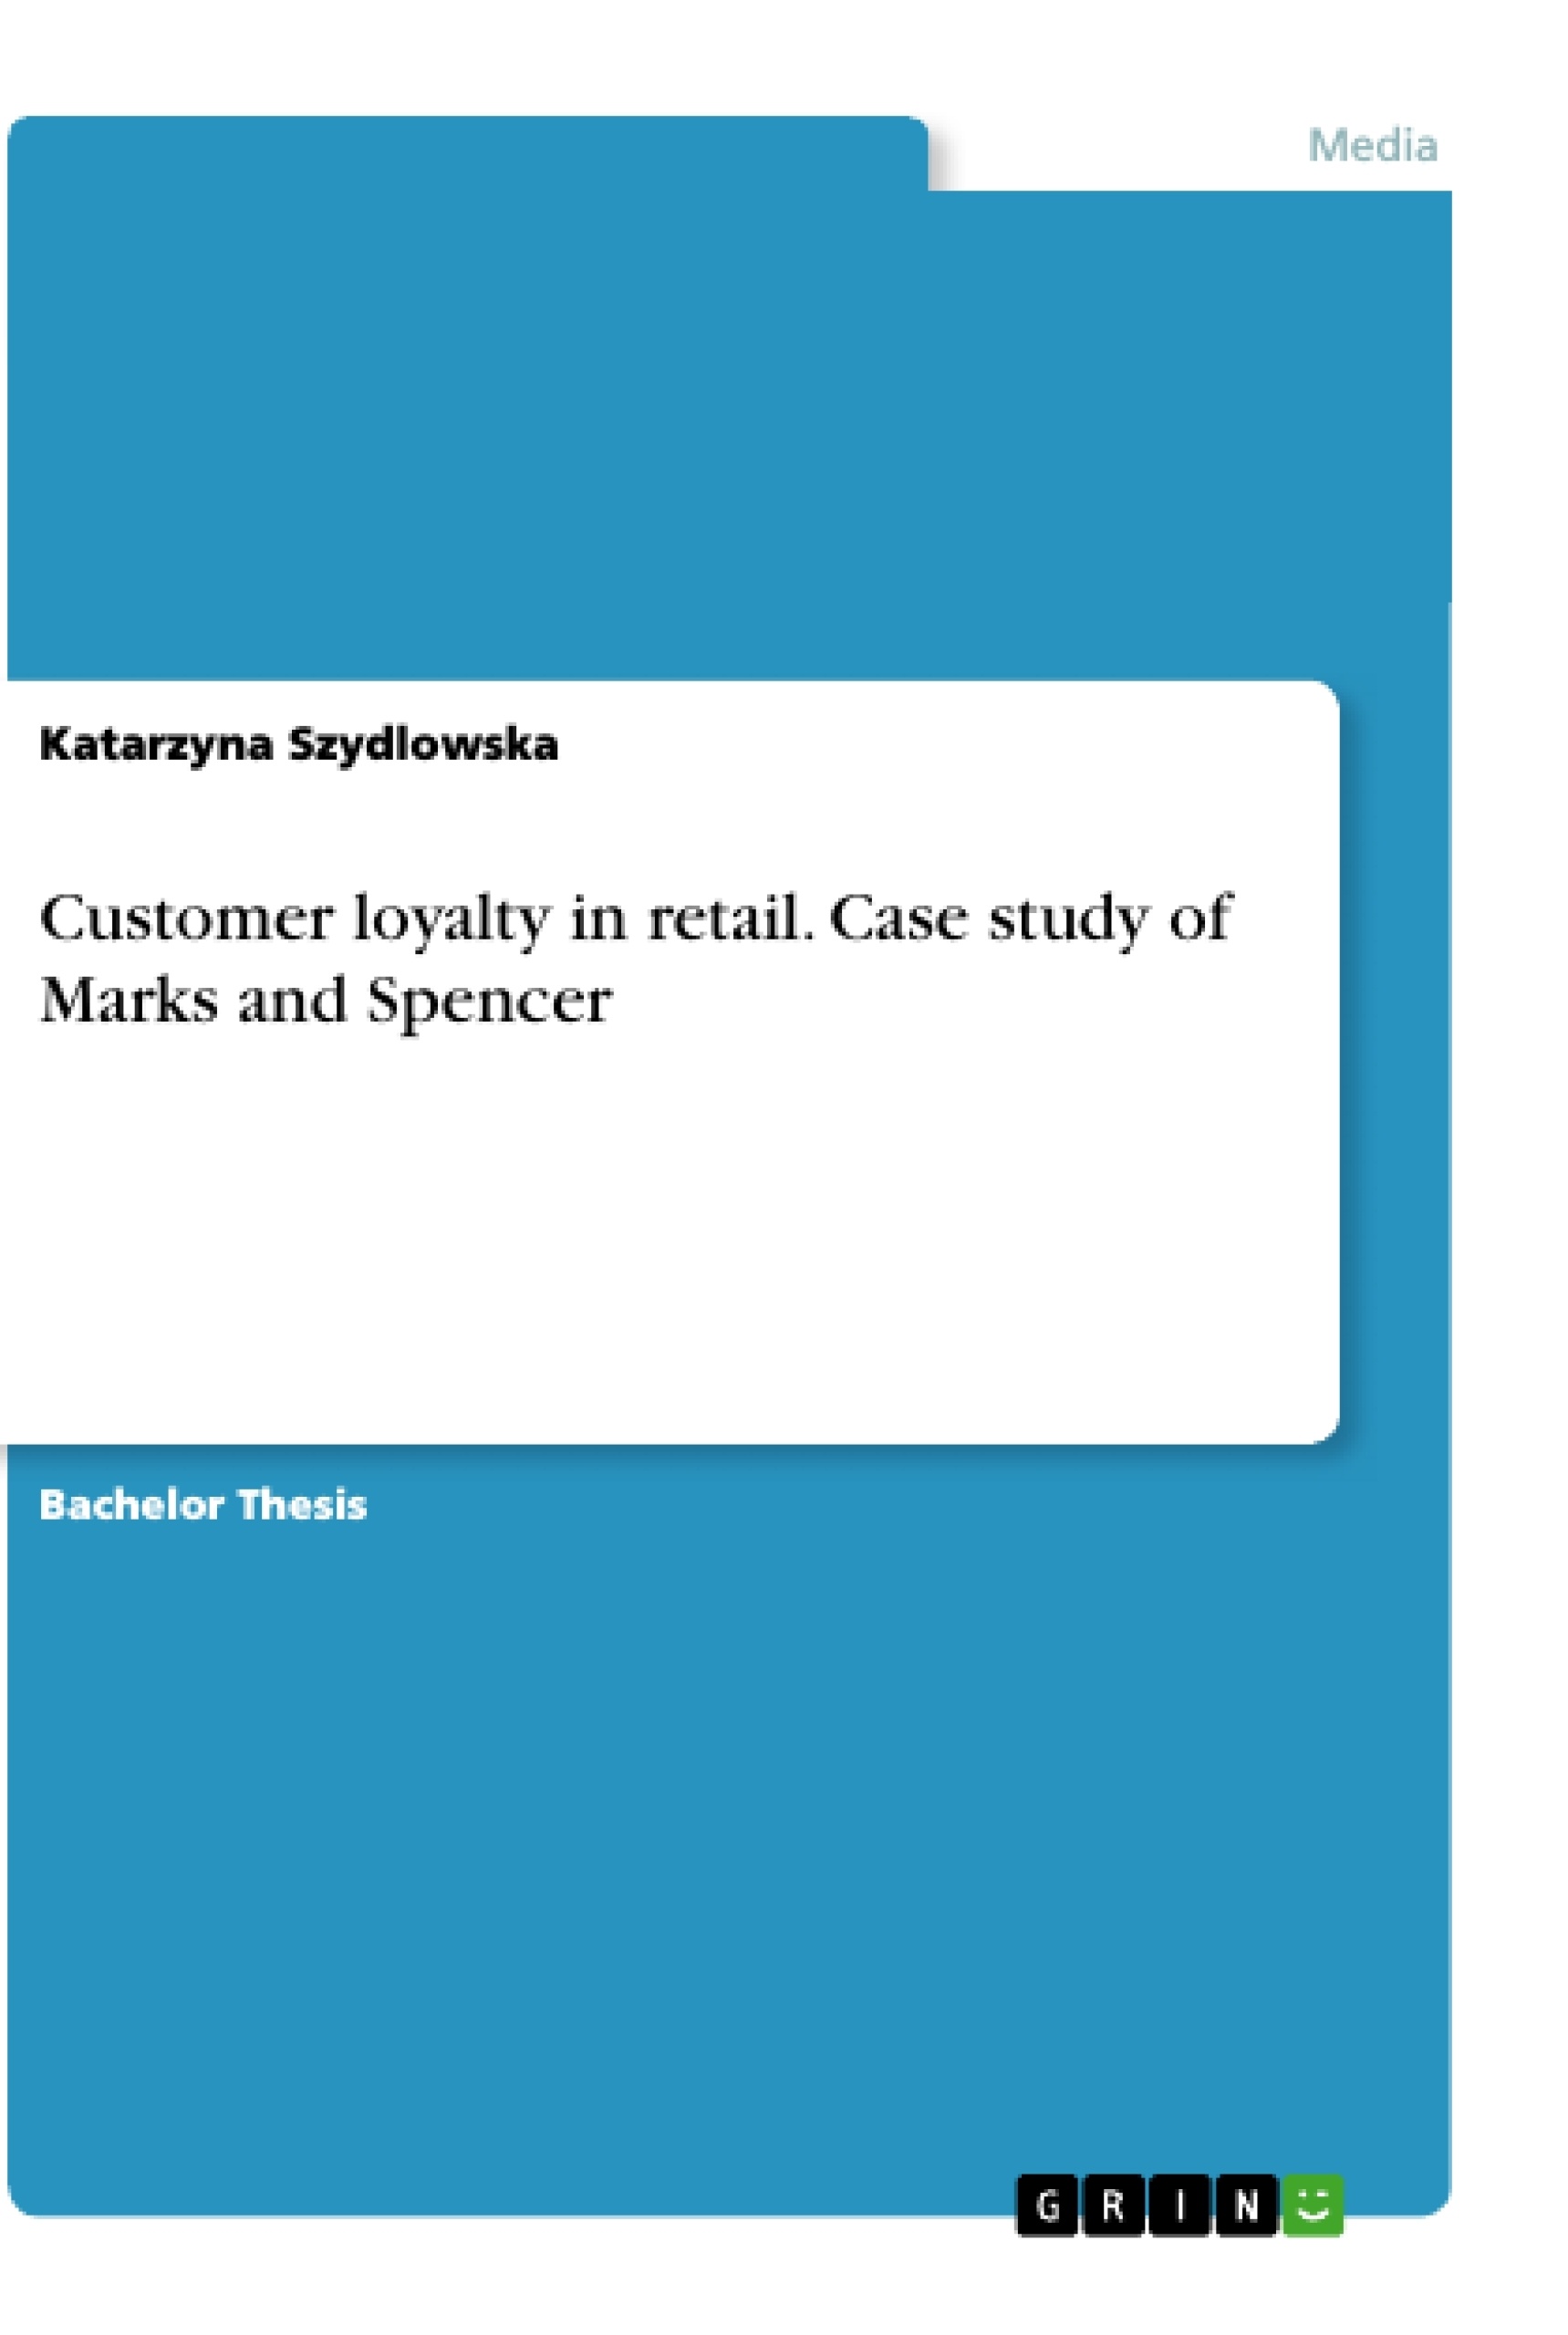 Title: Customer loyalty in retail. Case study of Marks and Spencer